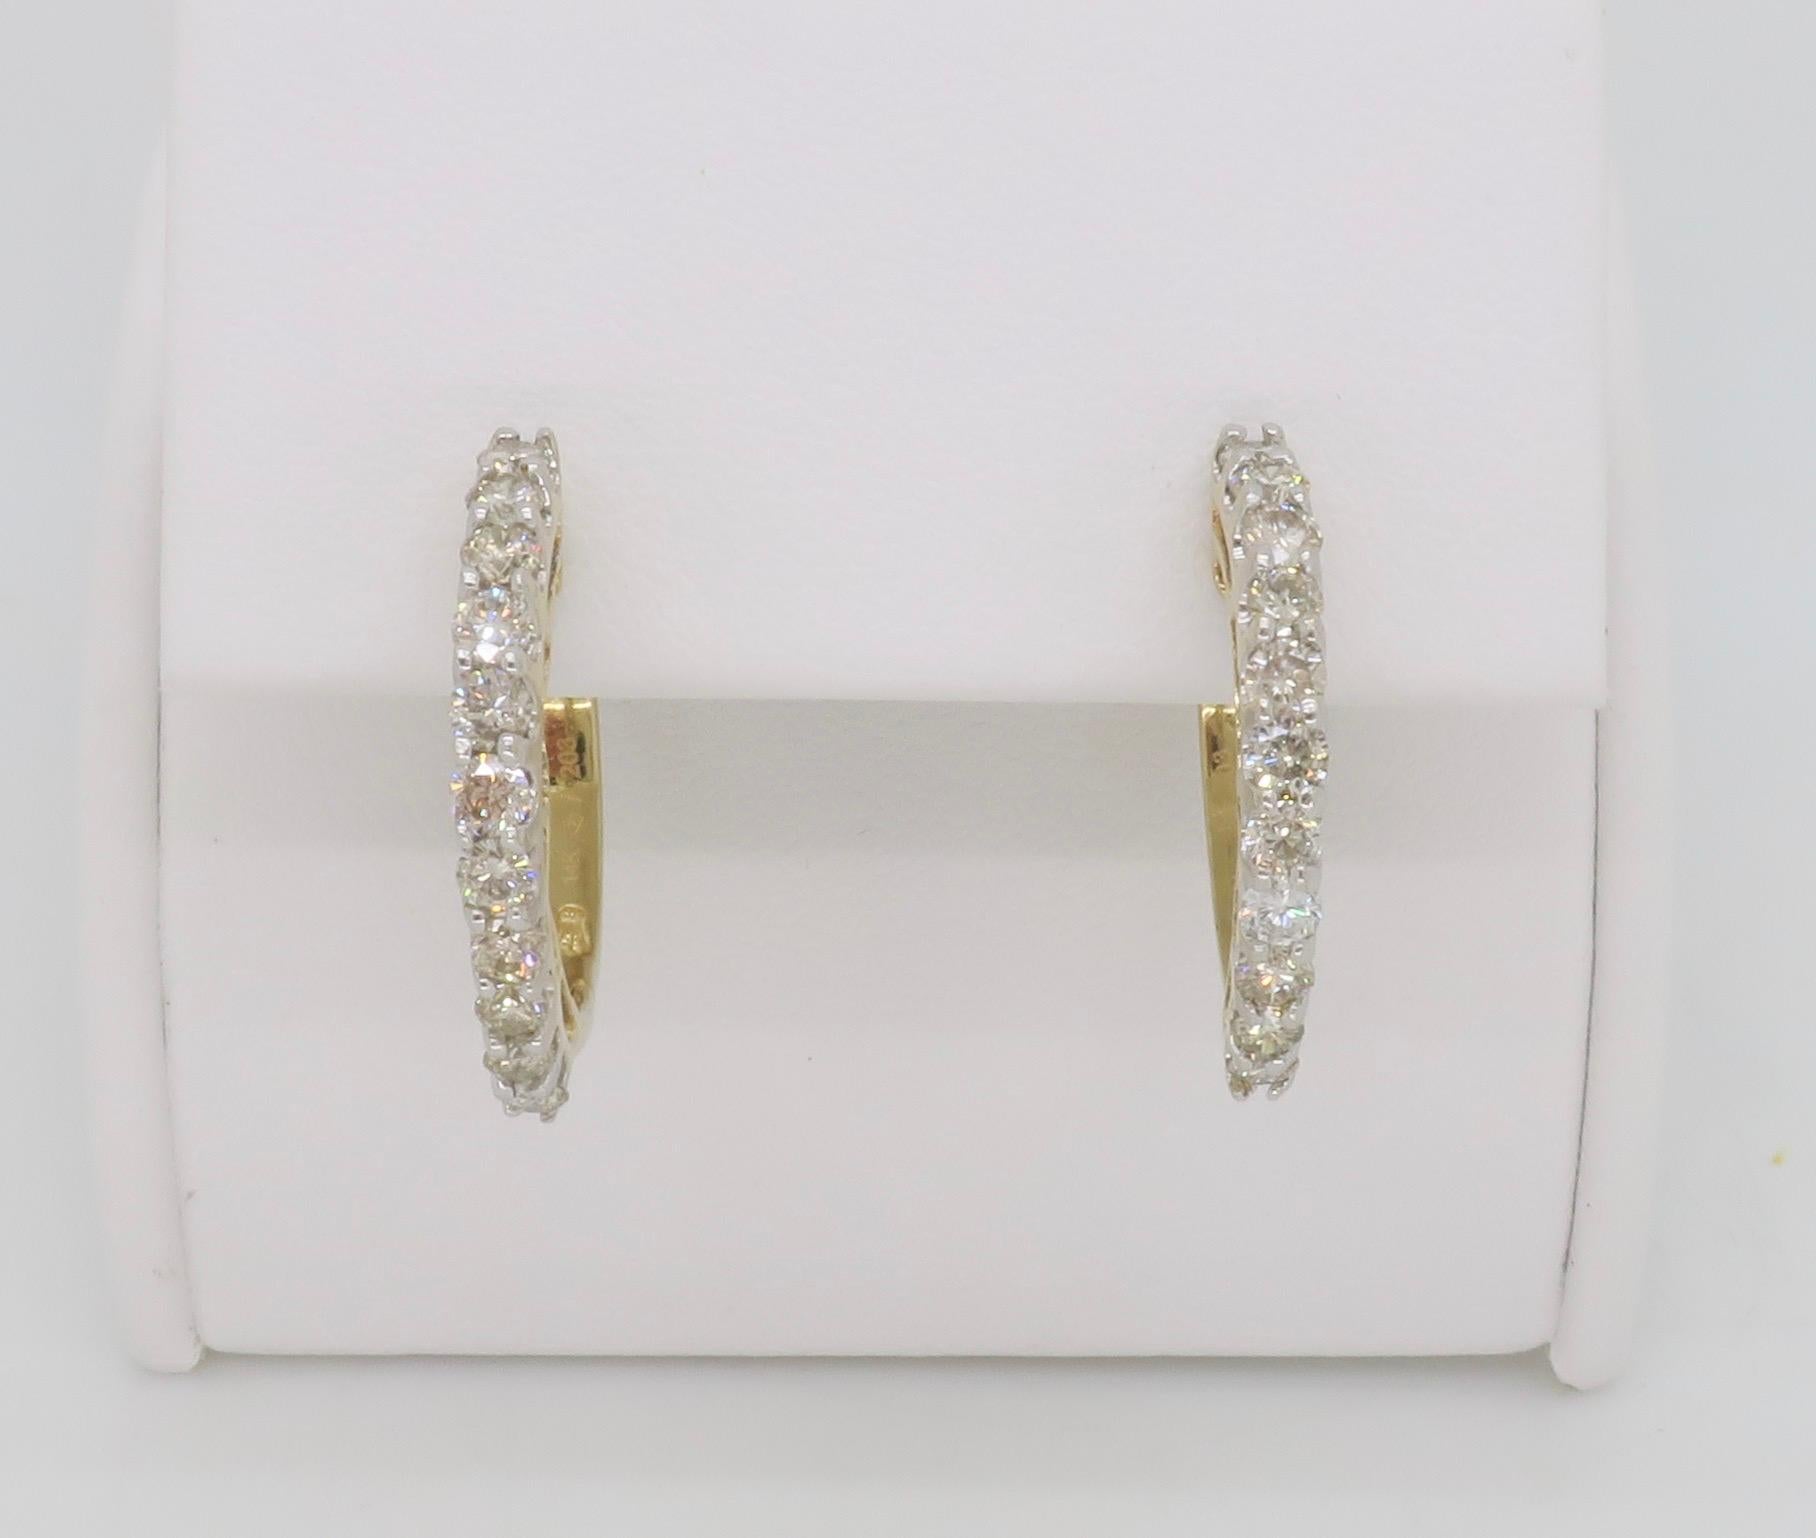 Stunning pair of half-hoop diamond earrings made in yellow gold. 

Diamond Carat Weight: 1.00CTW
Diamond Cut: Round Brilliant Cut Diamonds
Color: Average J-K
Clarity: Average VS-SI
Metal: 14K Yellow Gold
Marked/Tested: Stamped “14k